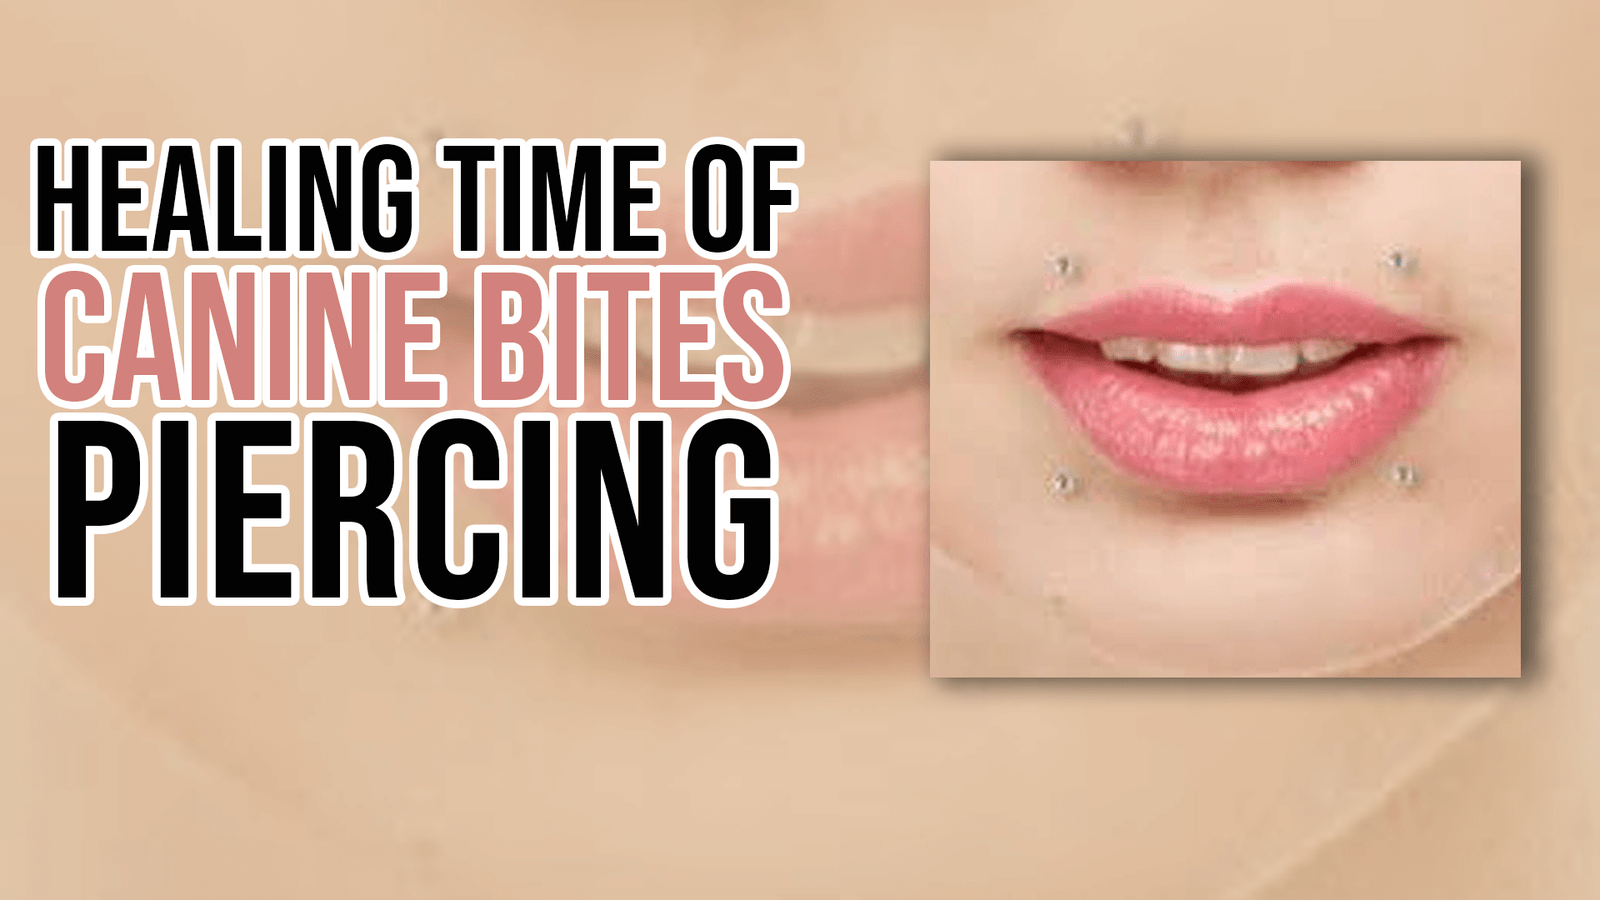 Healing Time of Canine Bites Piercing